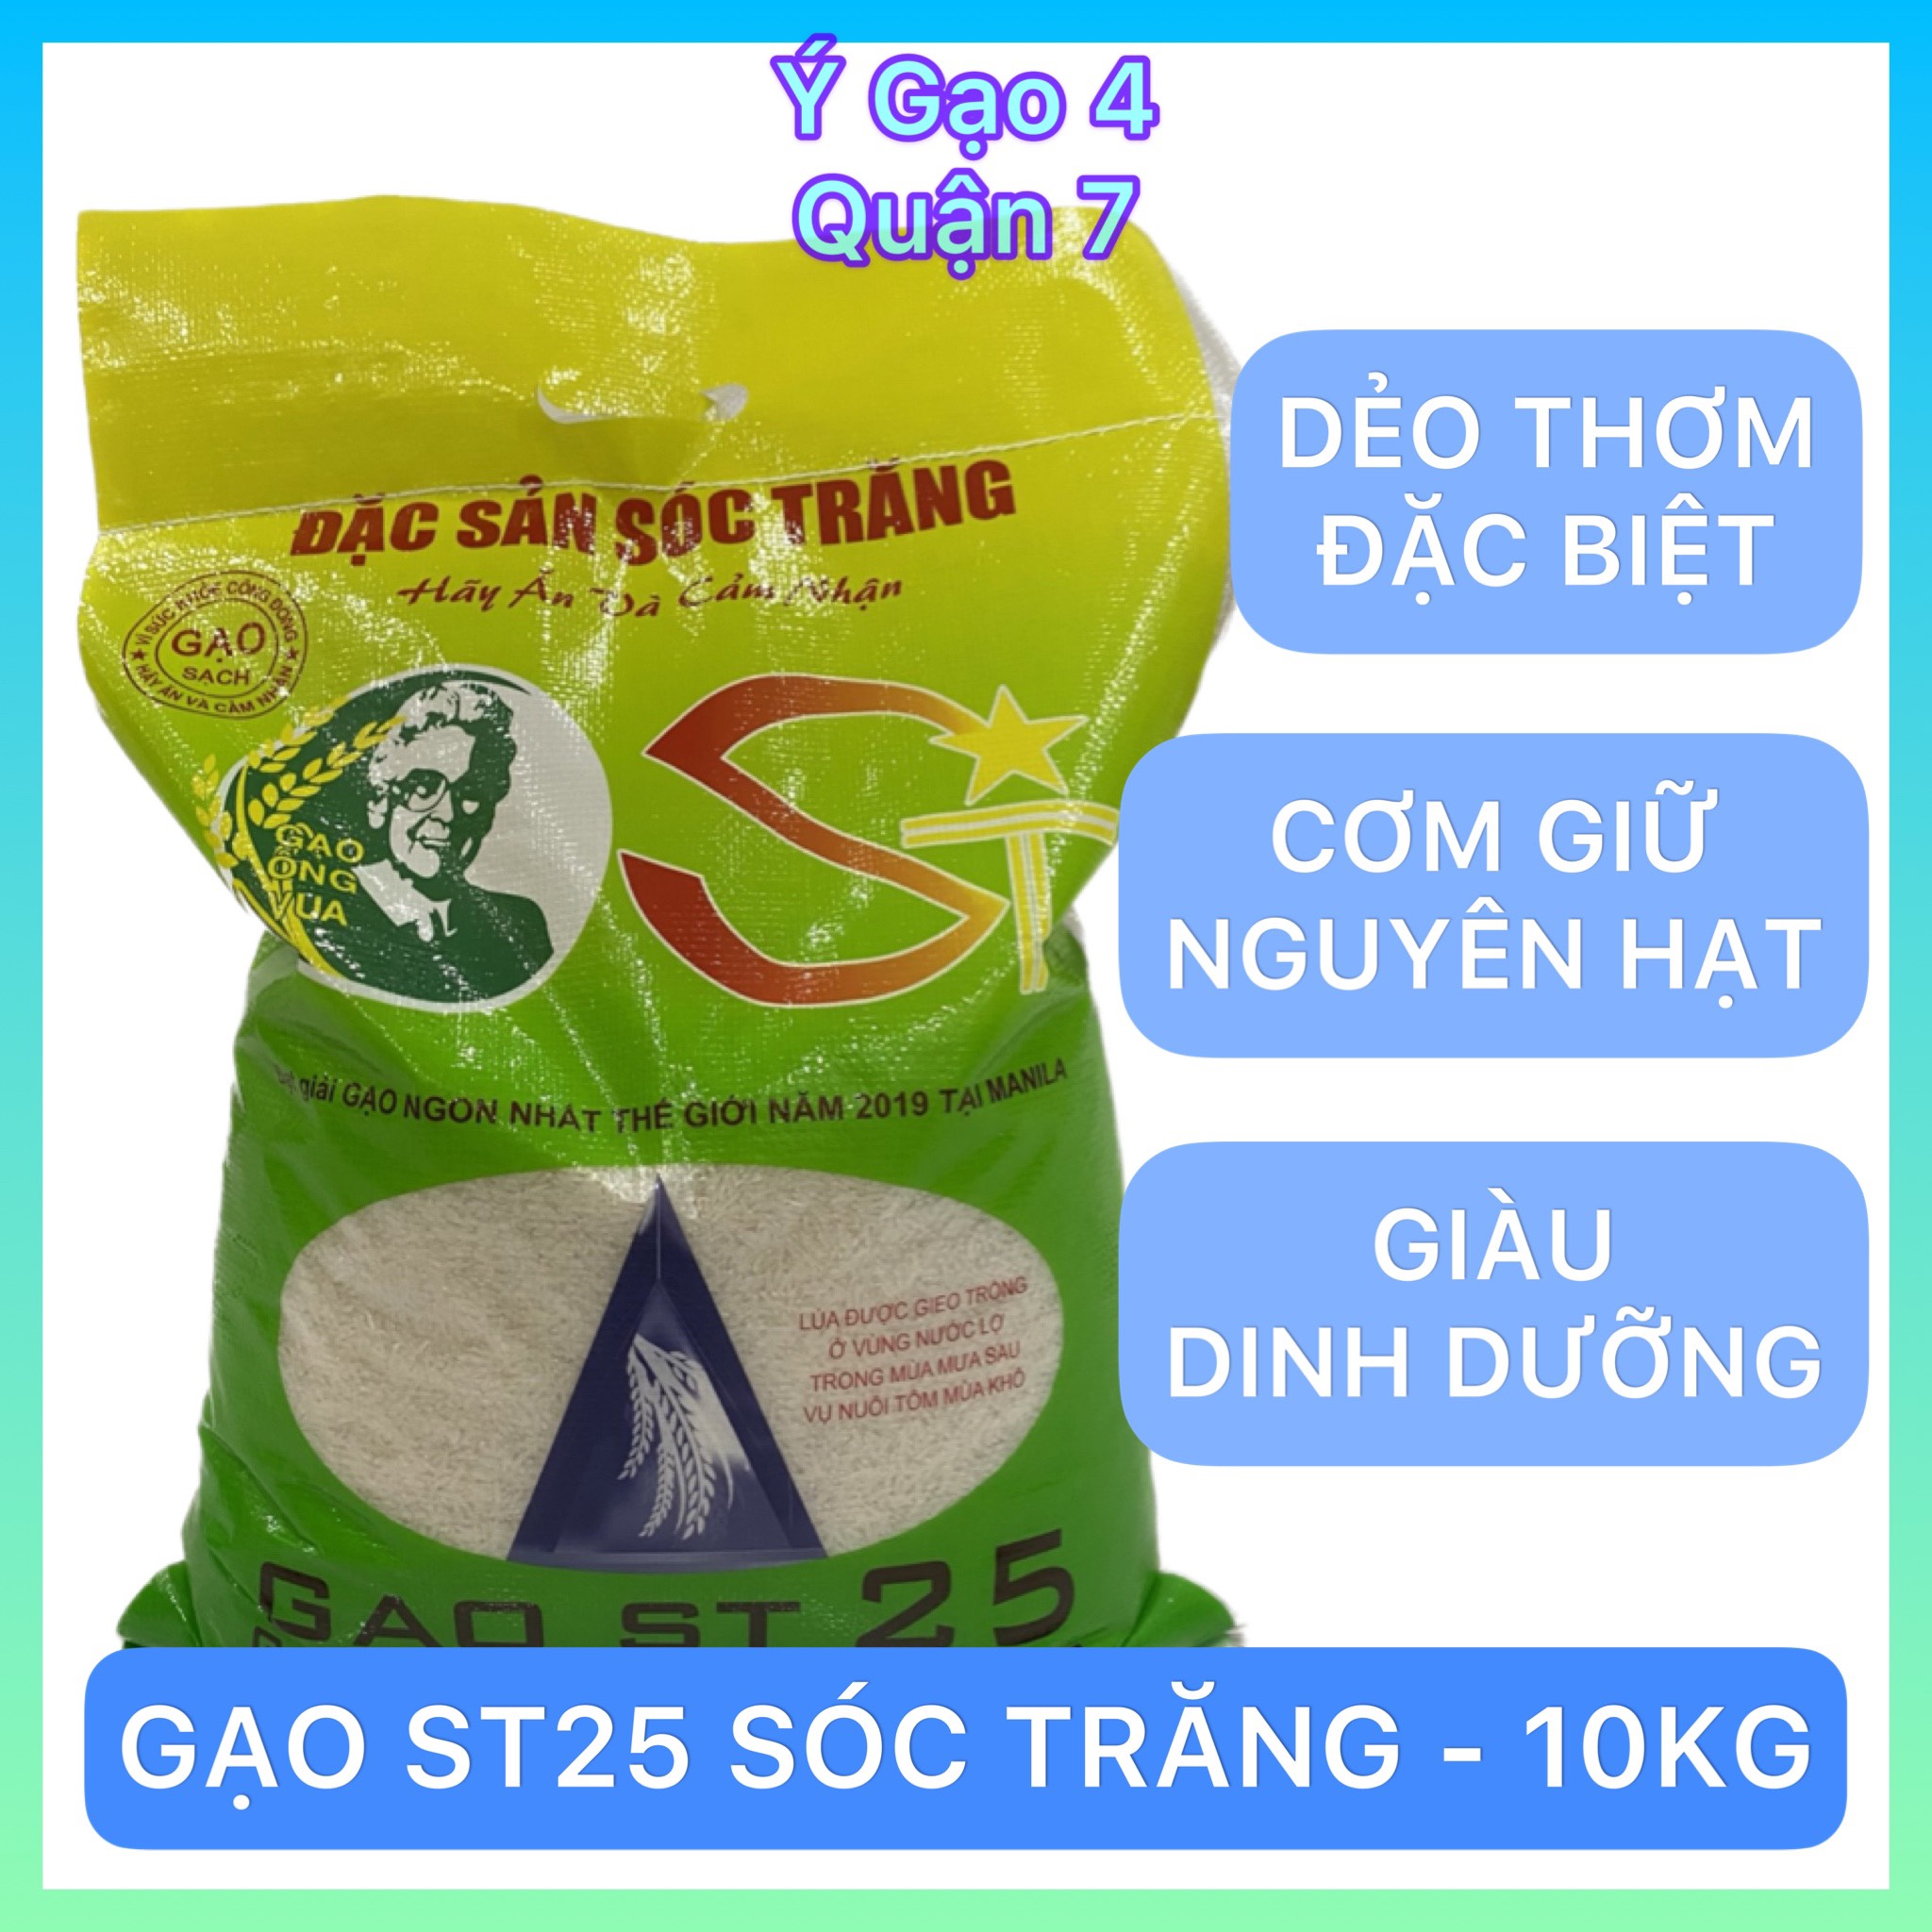 ST25 Soc Trang rice 10kg - top 1 the word in 2019